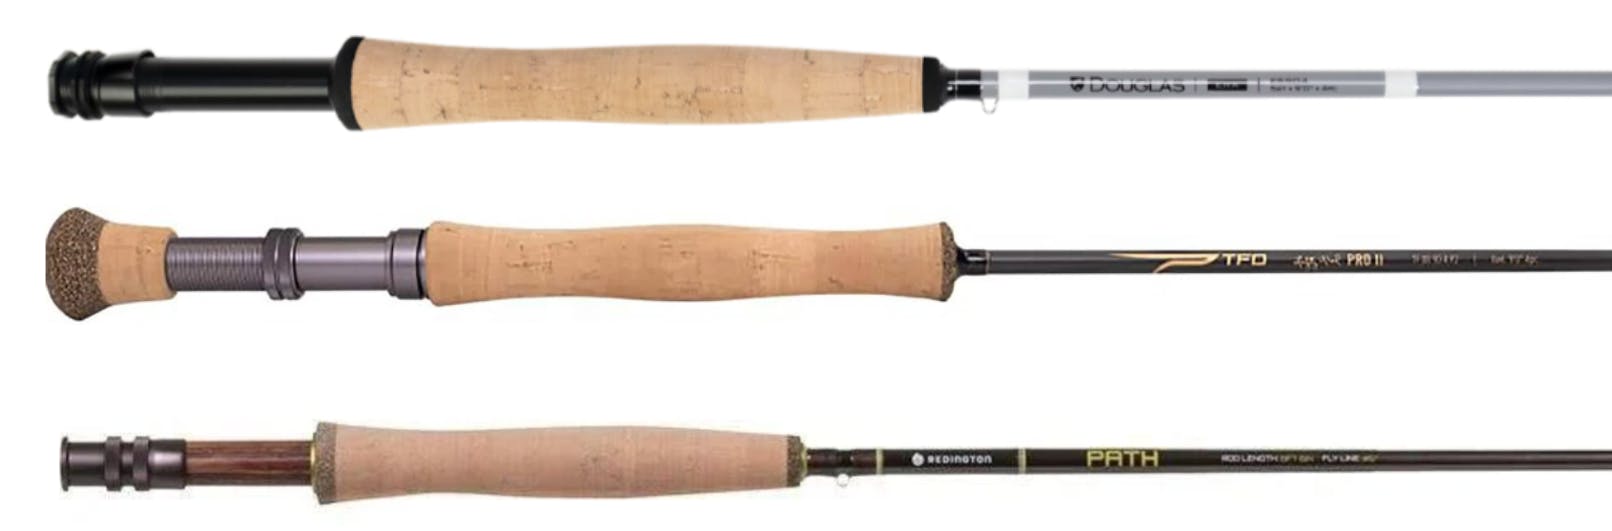 Three fly rods. From top to bottom: the Douglas Era, the Temple Fork Outfitters Pro 3, and the Redington Path.